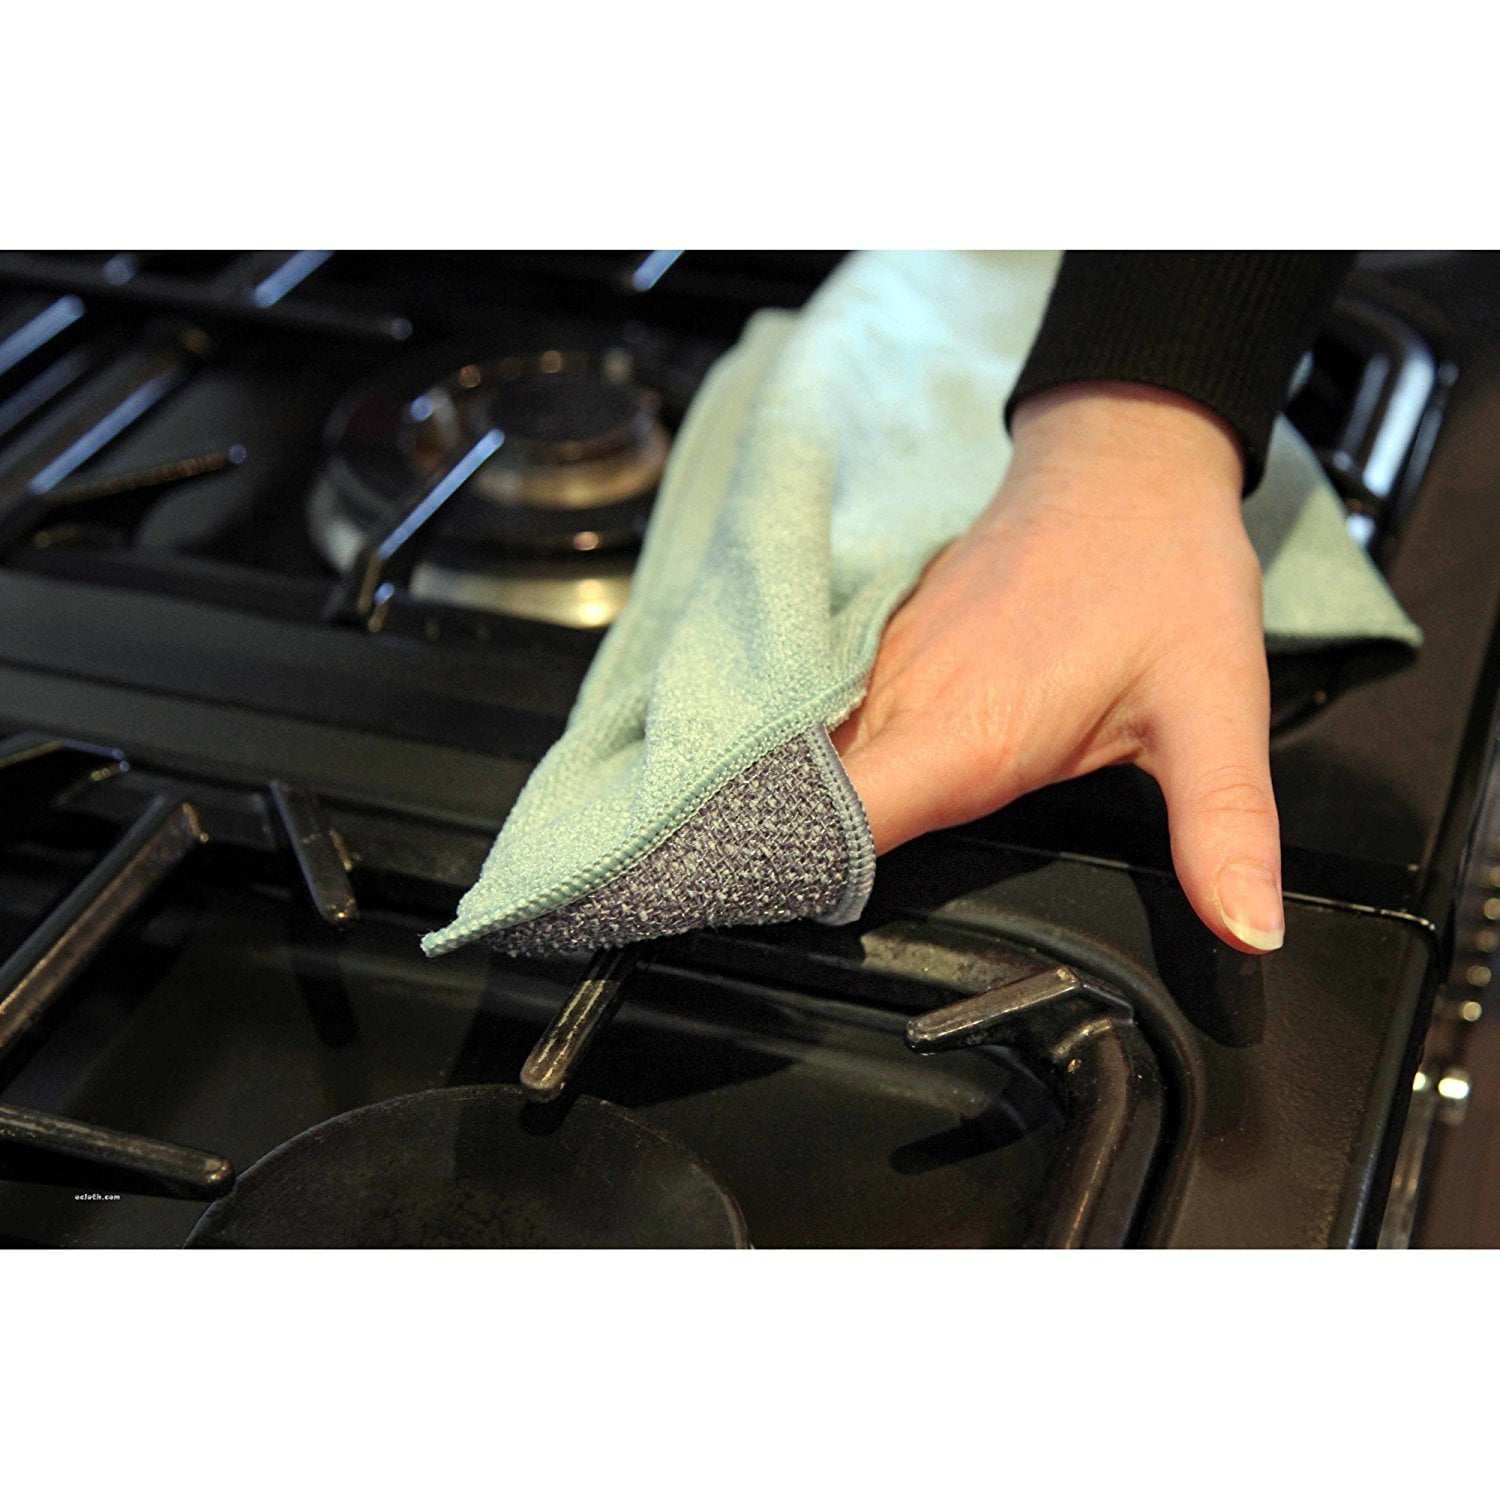 Kitchen Cleaning Cloths  Multi-Purpose Cloths for Kitchen Surfaces - E- Cloth Inc